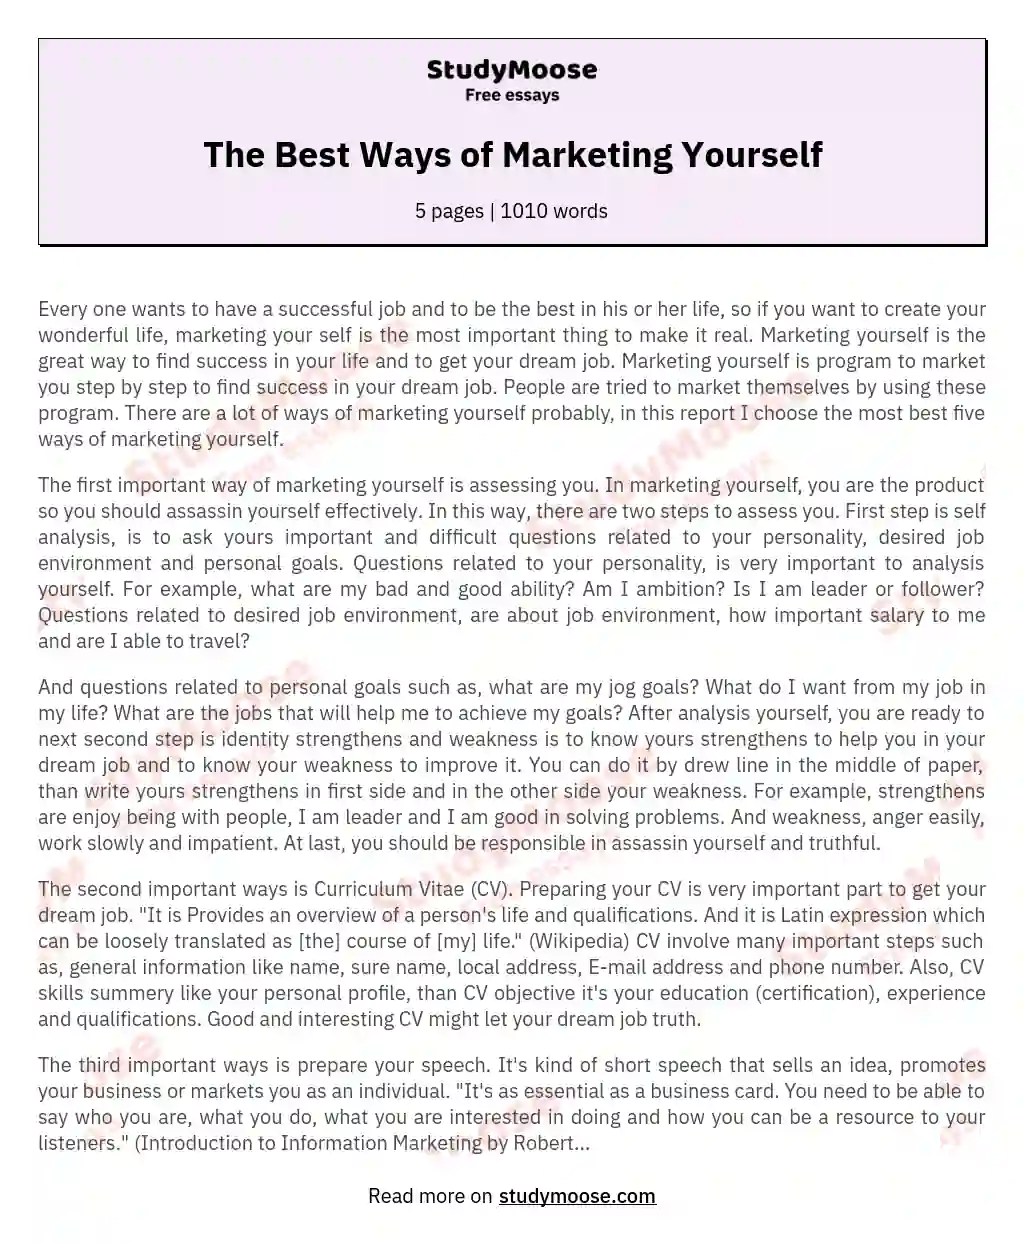 The Best Ways of Marketing Yourself essay